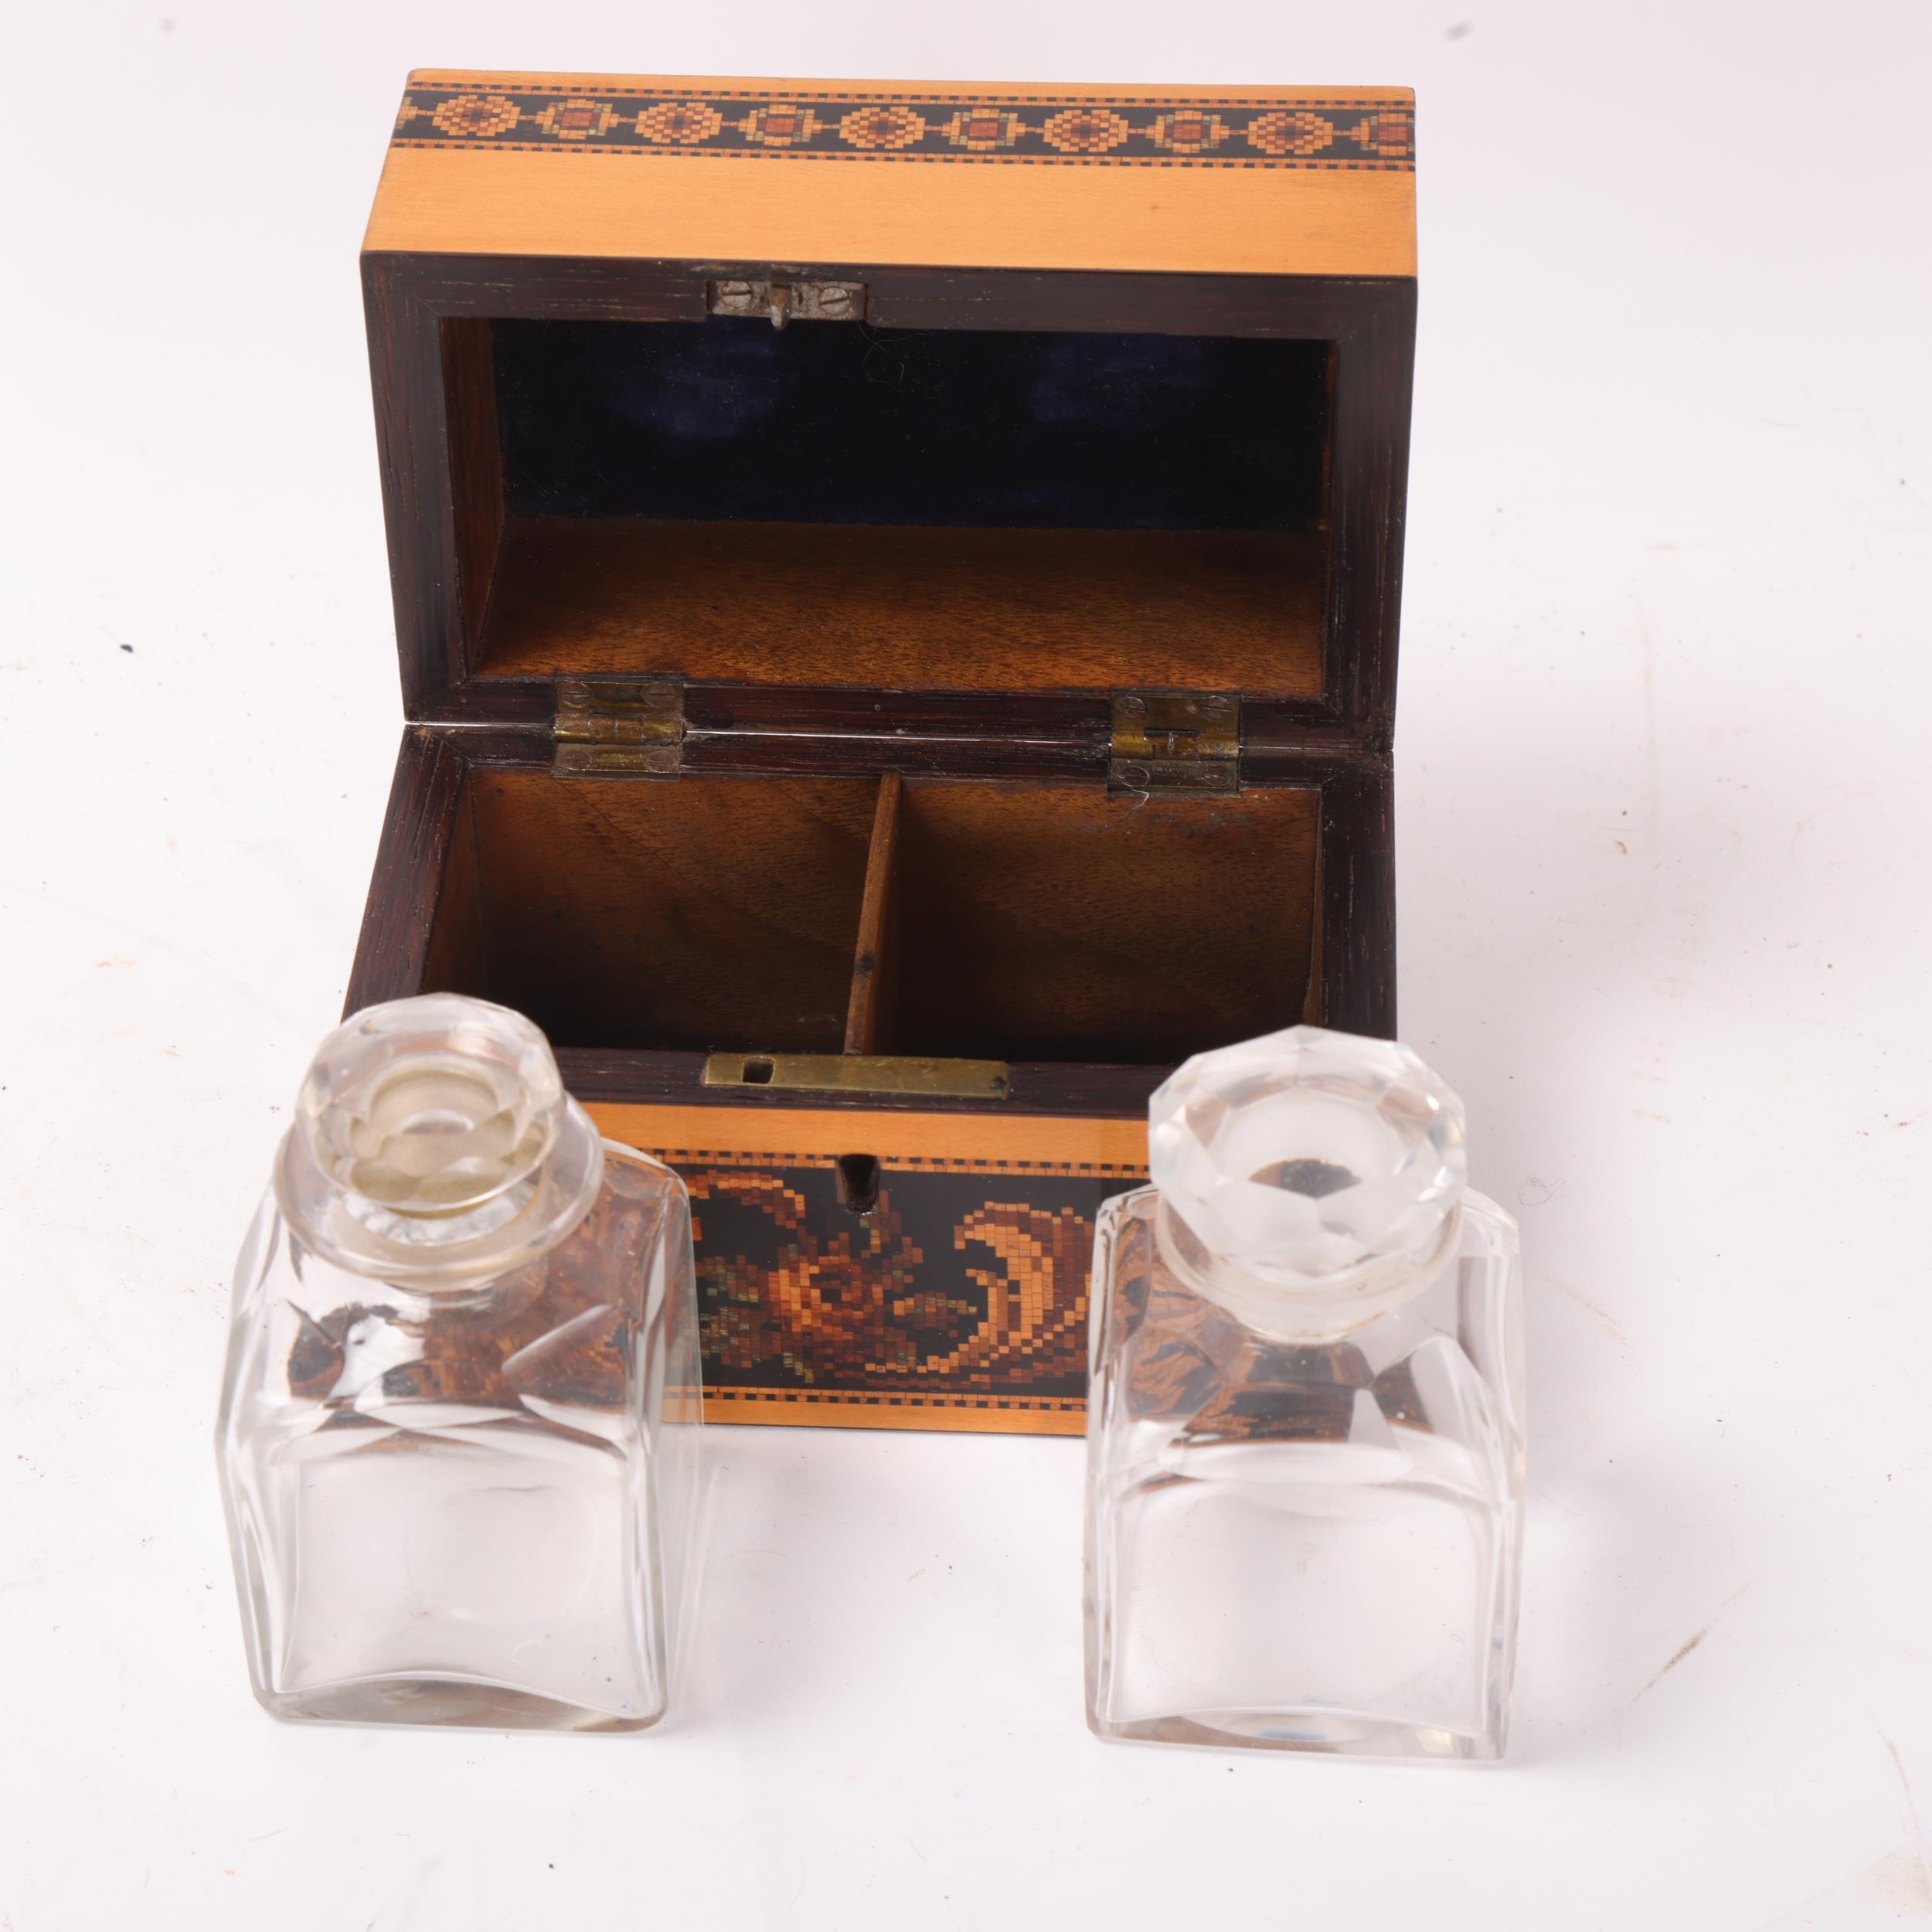 Victorian Tunbridge Ware perfume bottle box, floral micro-mosaic decoration, fitted with 2 glass - Image 2 of 3